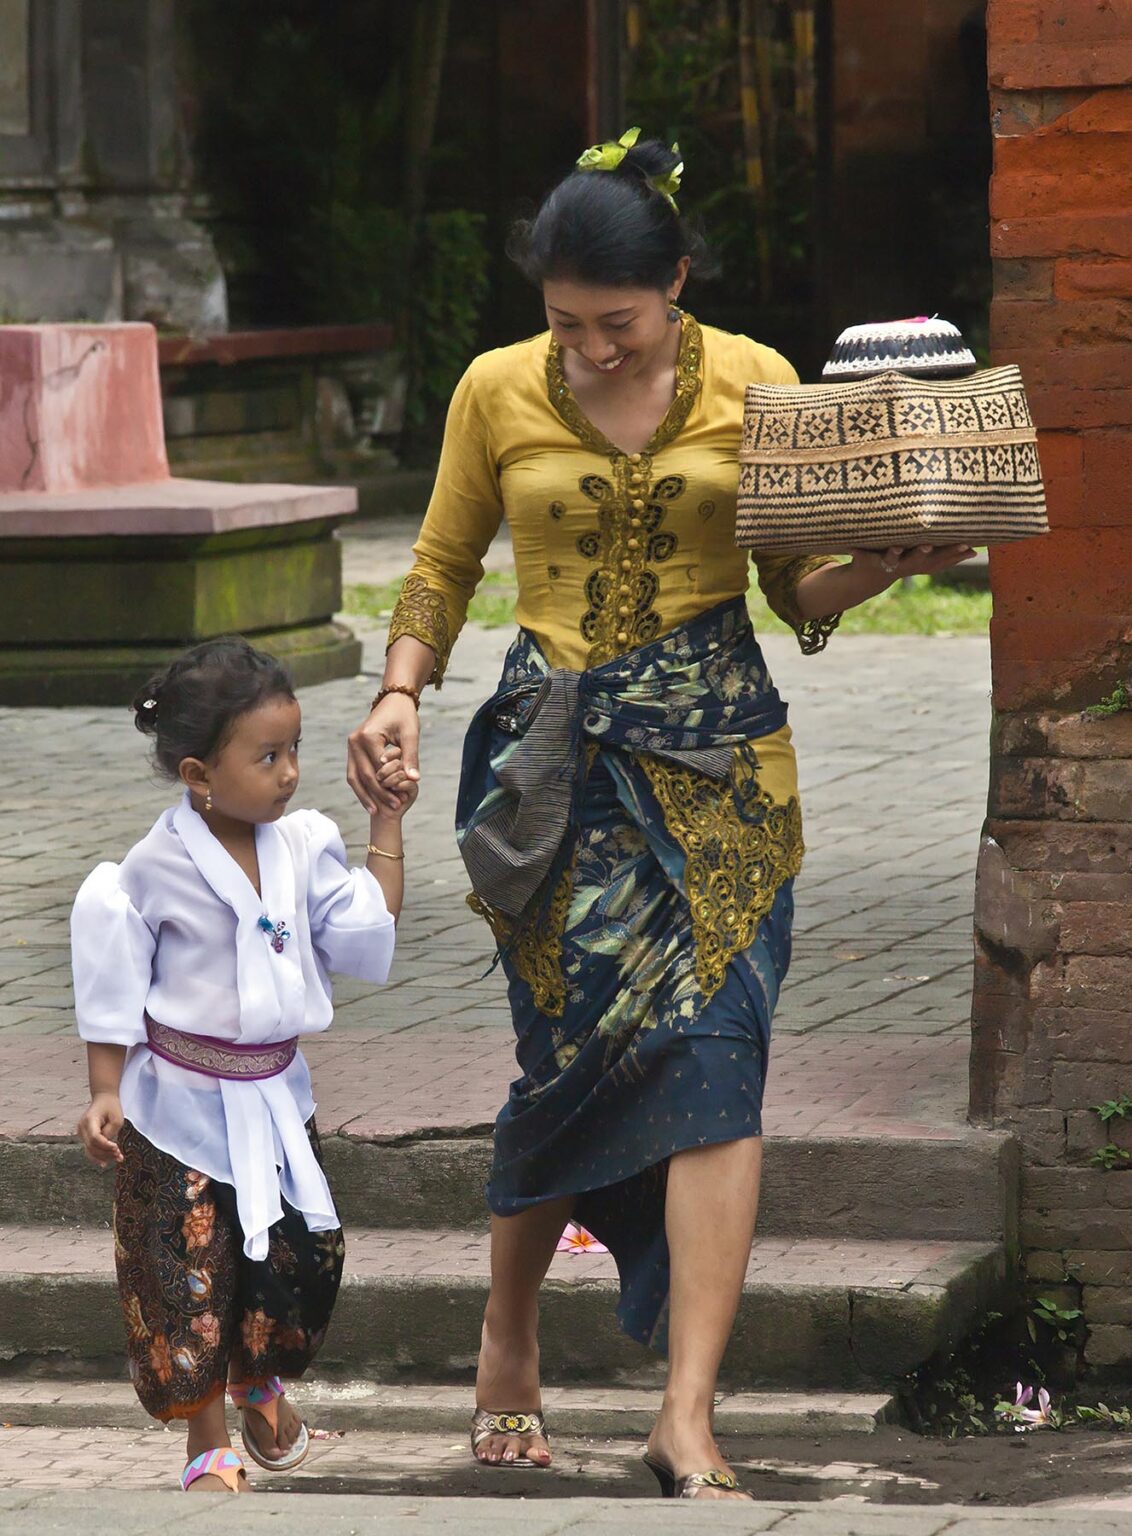 BALINESE woman and daughter carry offerings intothe Hindu temple of PURA DESA during the GALUNGAN FESTIVAL - UBUD, BALI, INDONESIA